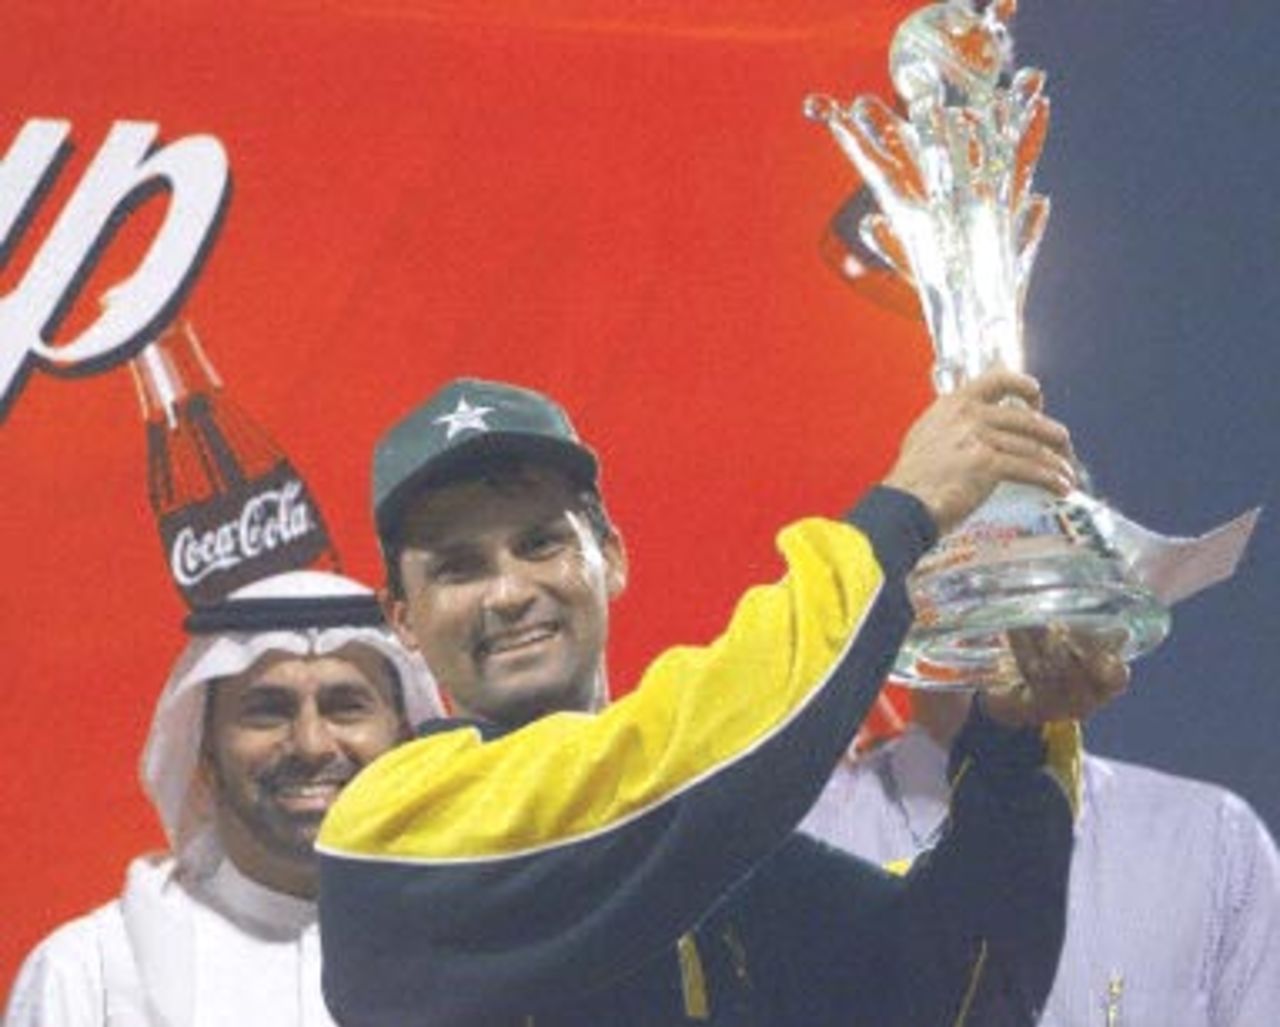 Pakistani cricket team captain Moin Khan raises the Criket Internationl Games trophy after defeating South Africa by 24 points in Sharjah 31  March 2000. The game ended 263-247 for Pakistan